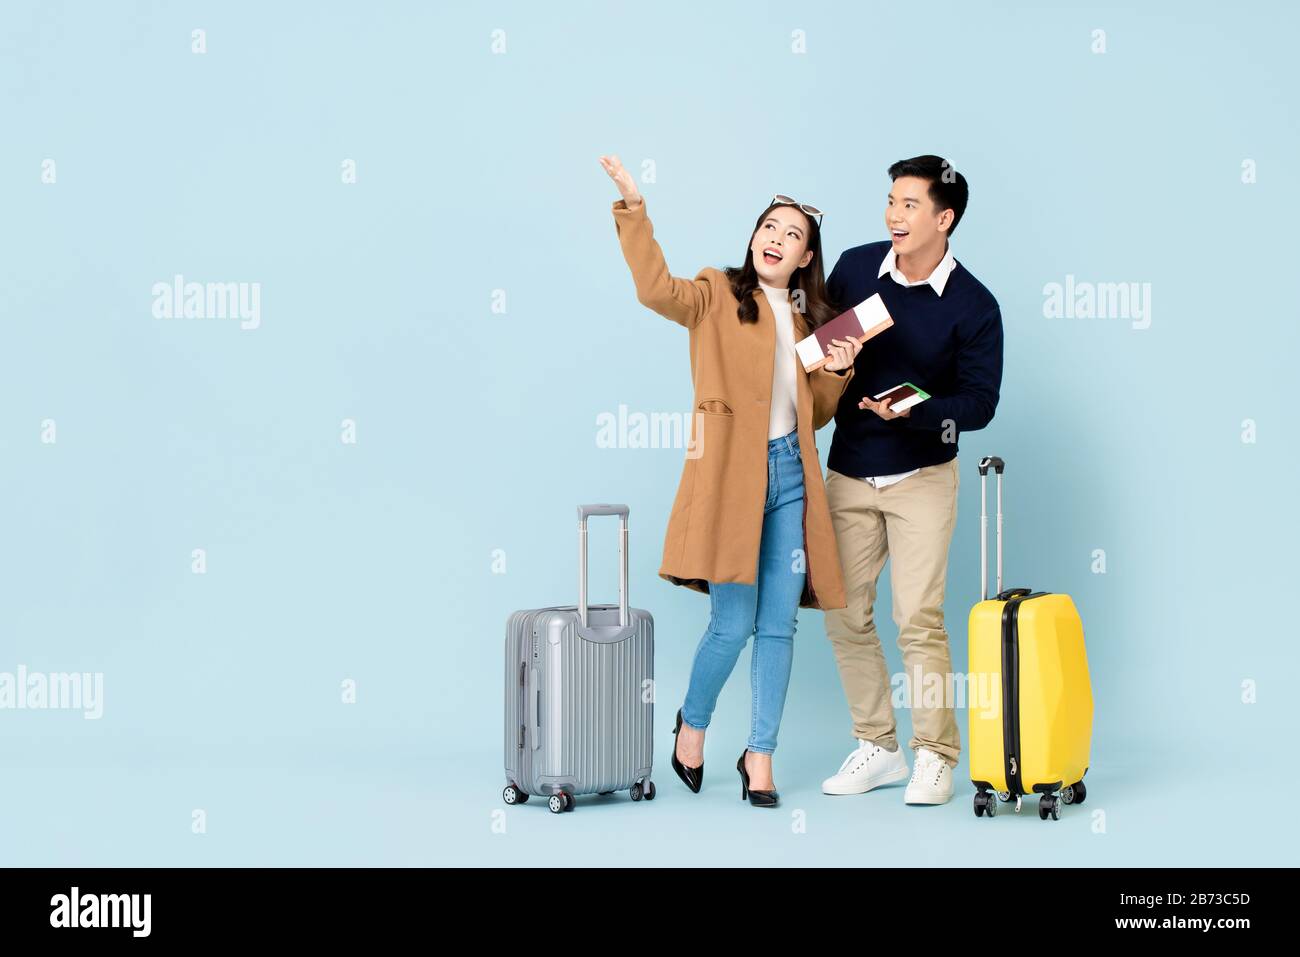 Lovely Asian couple tourists with baggage passports and boarding passes about to go for honeymoon travel Stock Photo